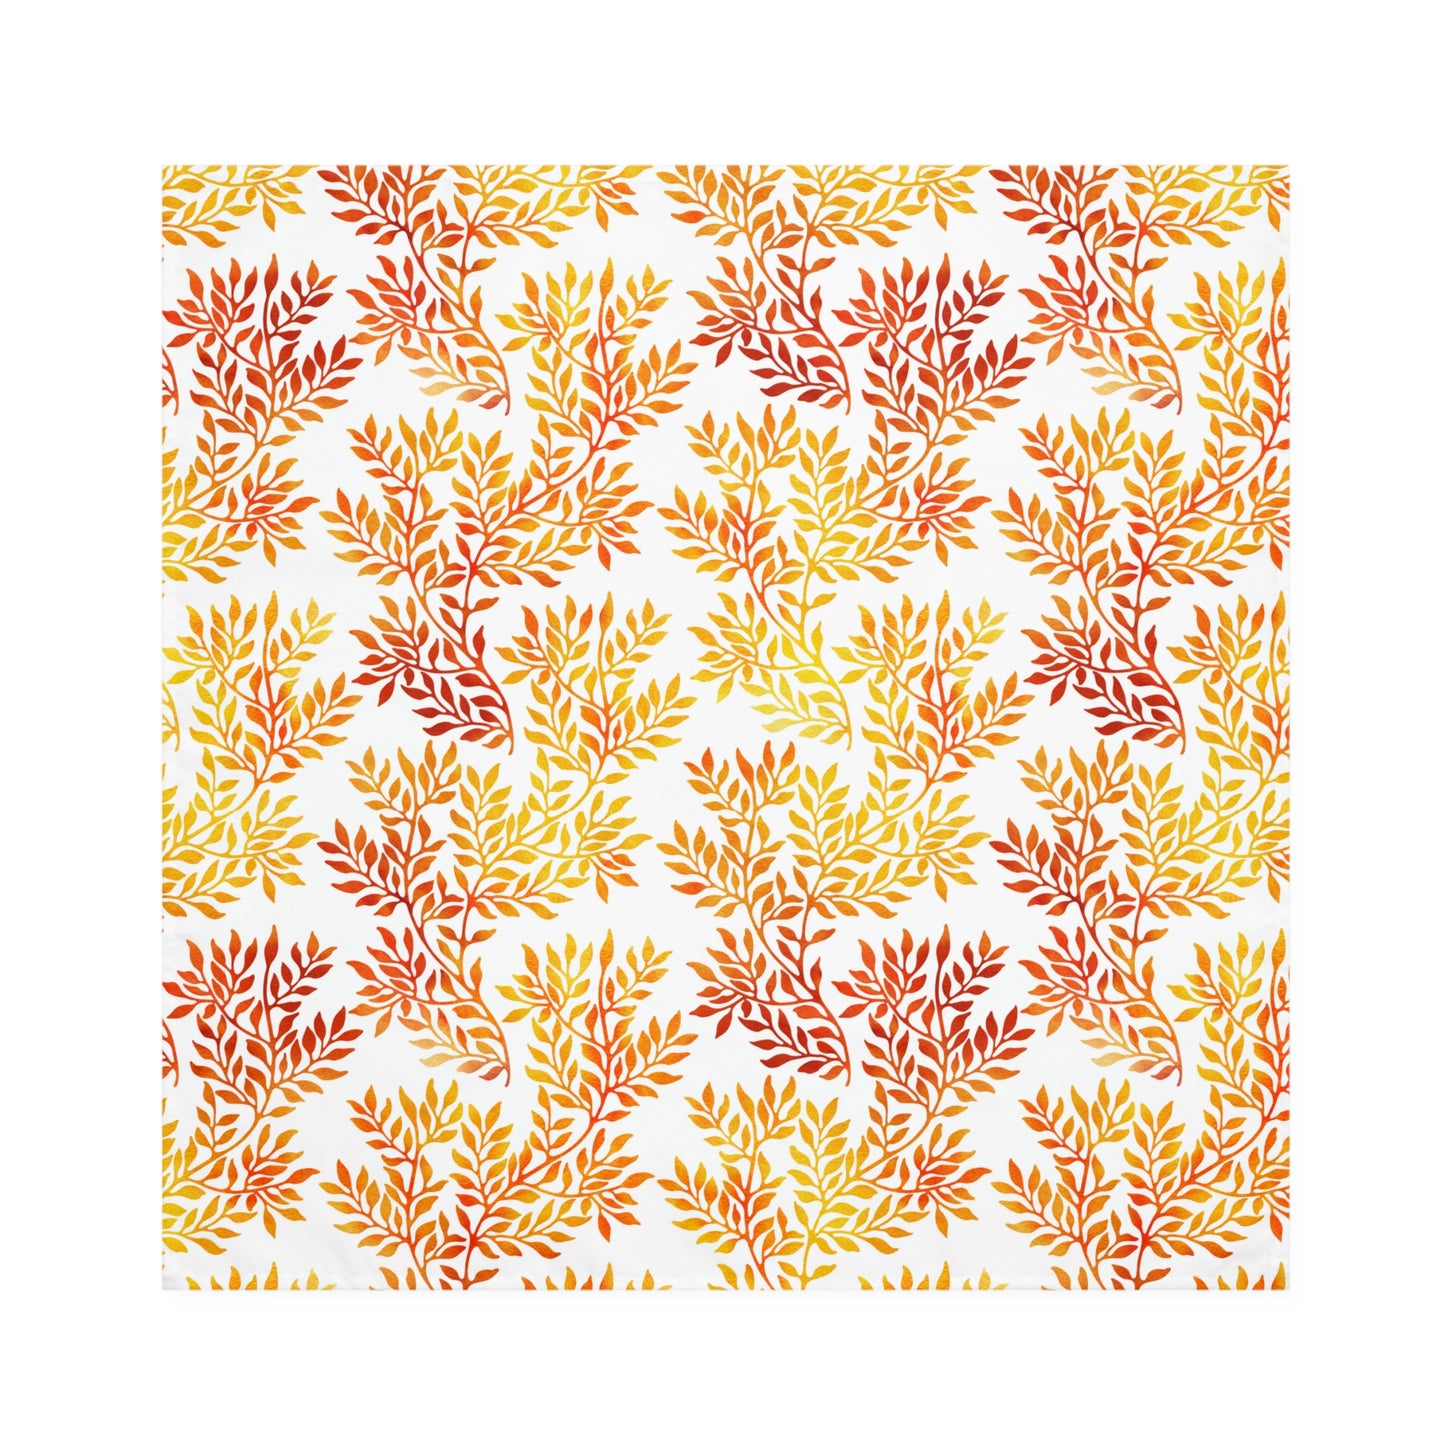 Fall Red and Orange Leaves Napkins Set of 4